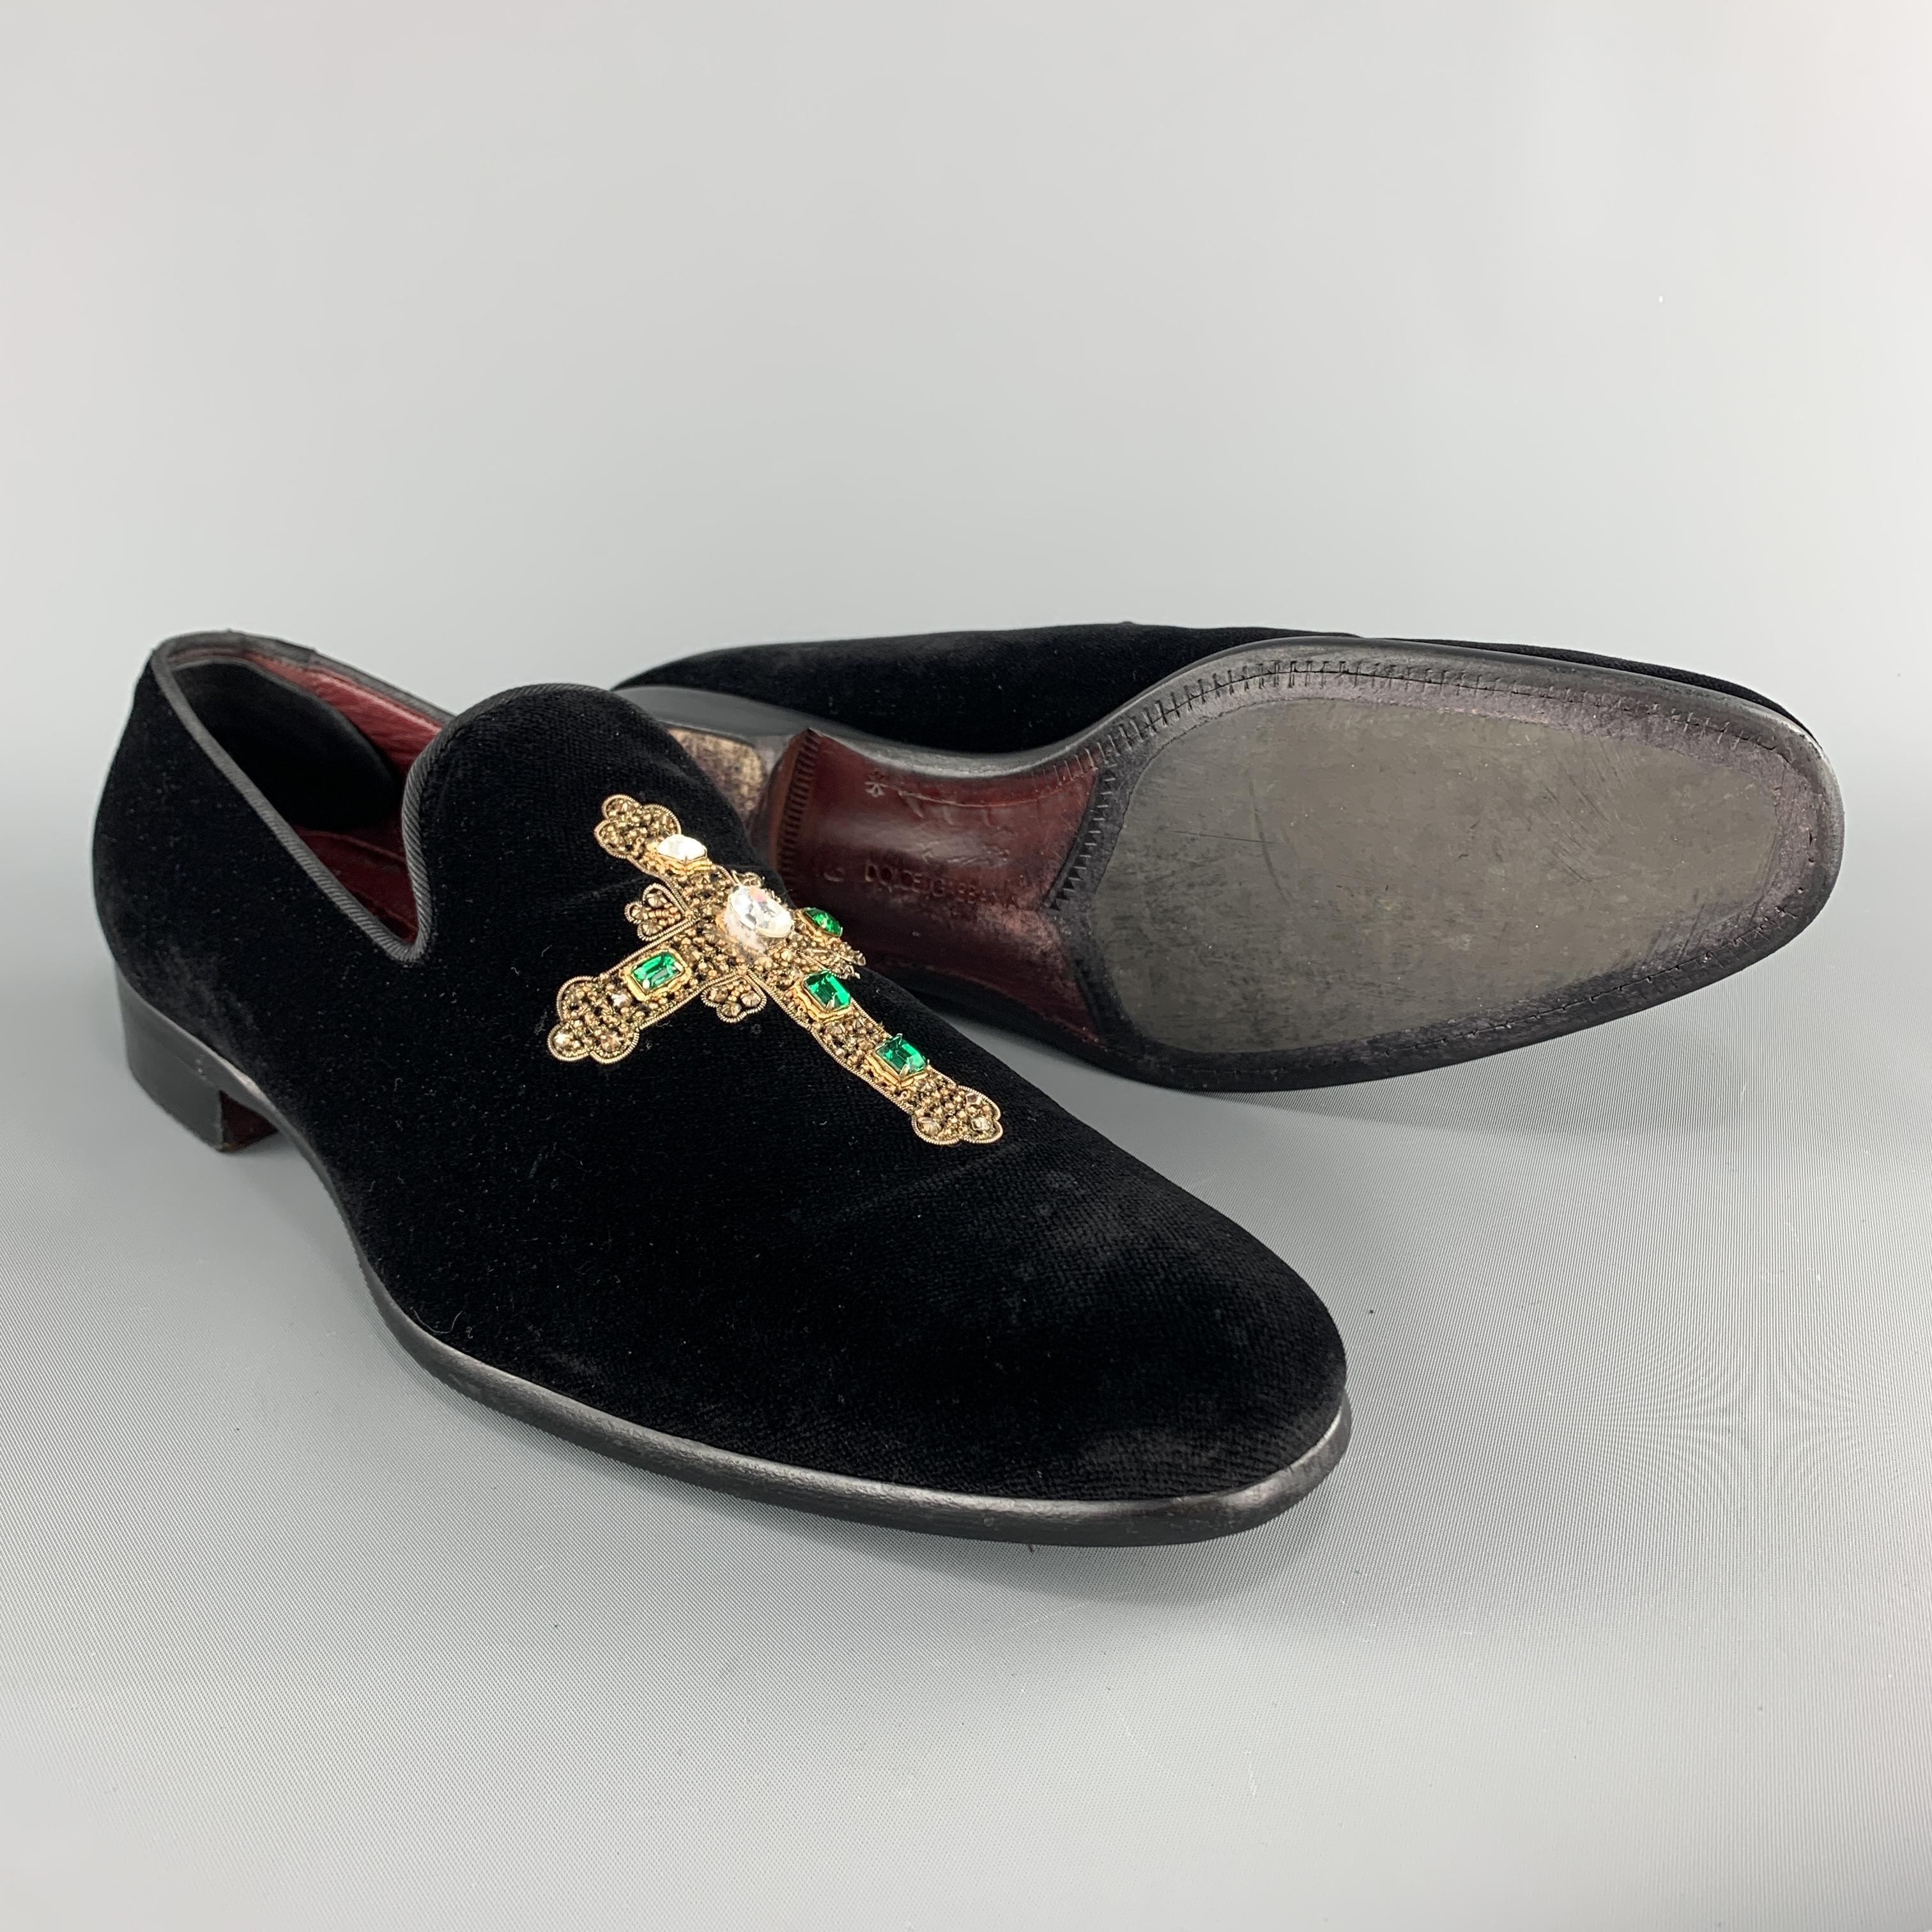 DOLCE & GABBANA tuxedo slipper loafers come in black velvet with gold beaded cross applique's detailed with clear and green rhinestones. Made in Italy.

Very Good Pre-Owned Condition.
Marked: UK 9

Outsole: 12.25 x 4 in.
 